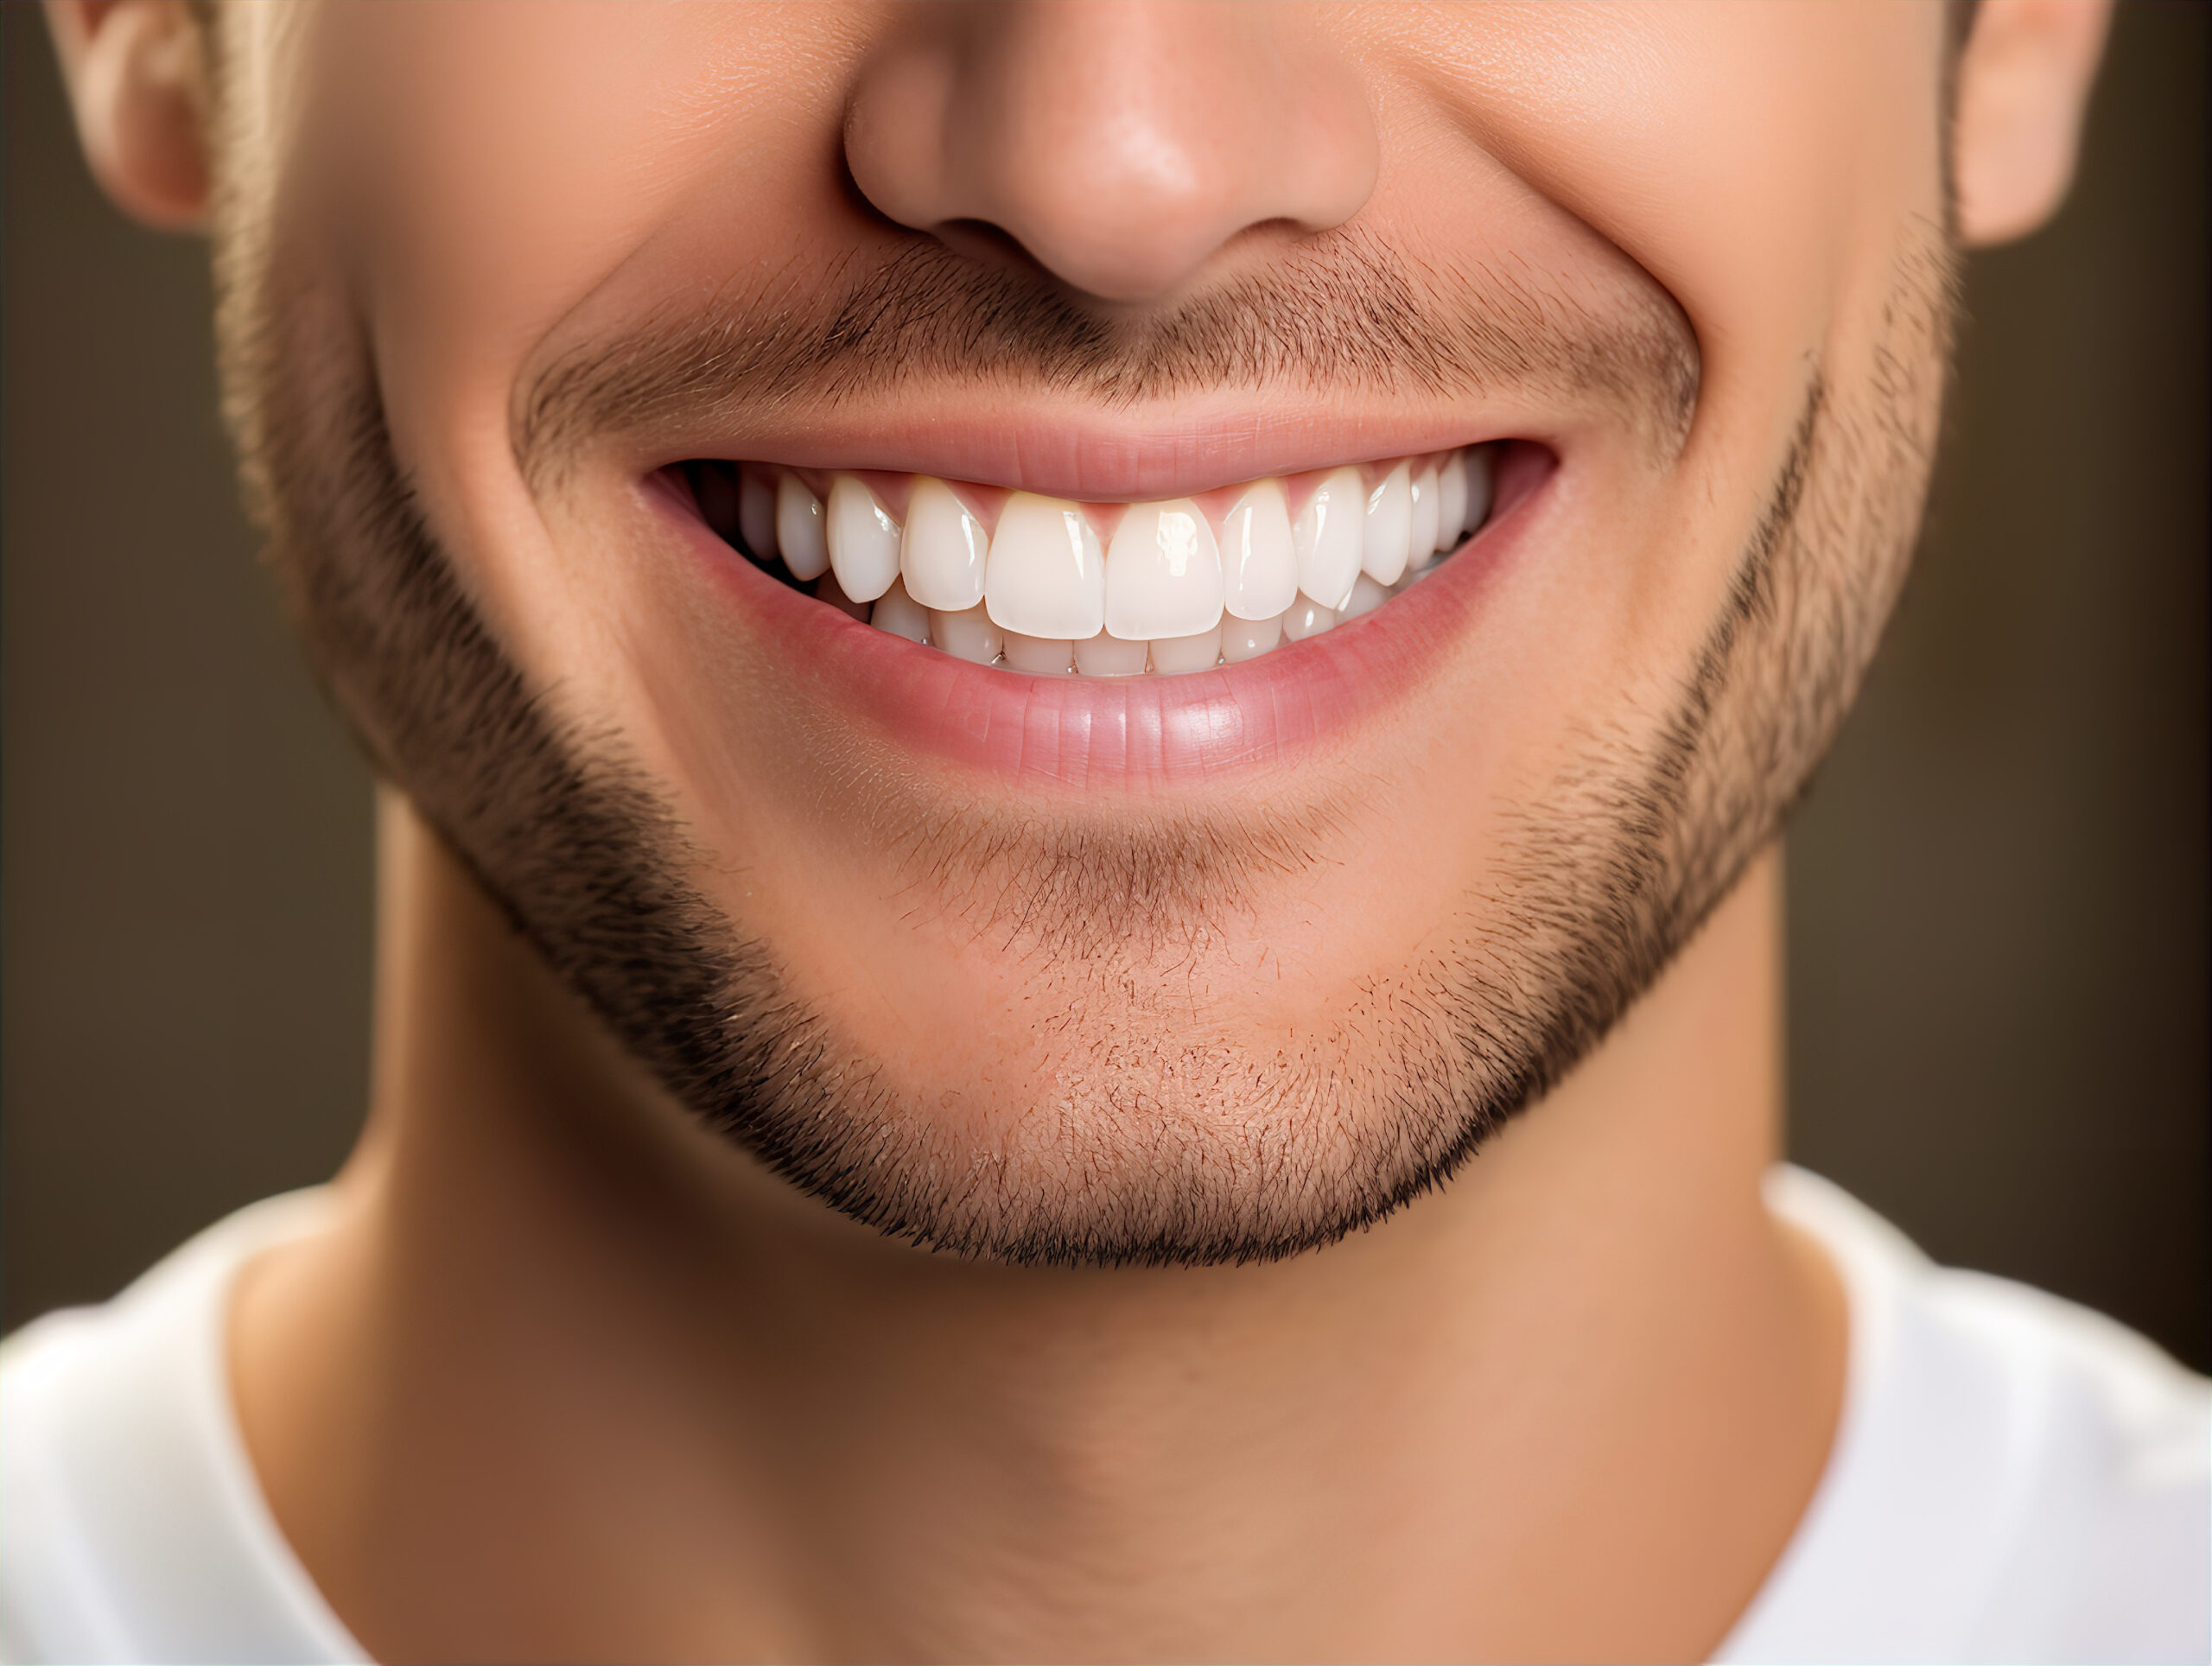 Which Types Of Procedures For Cosmetic Dentistry In Woodbridge, VA, Can I Get Treated With?